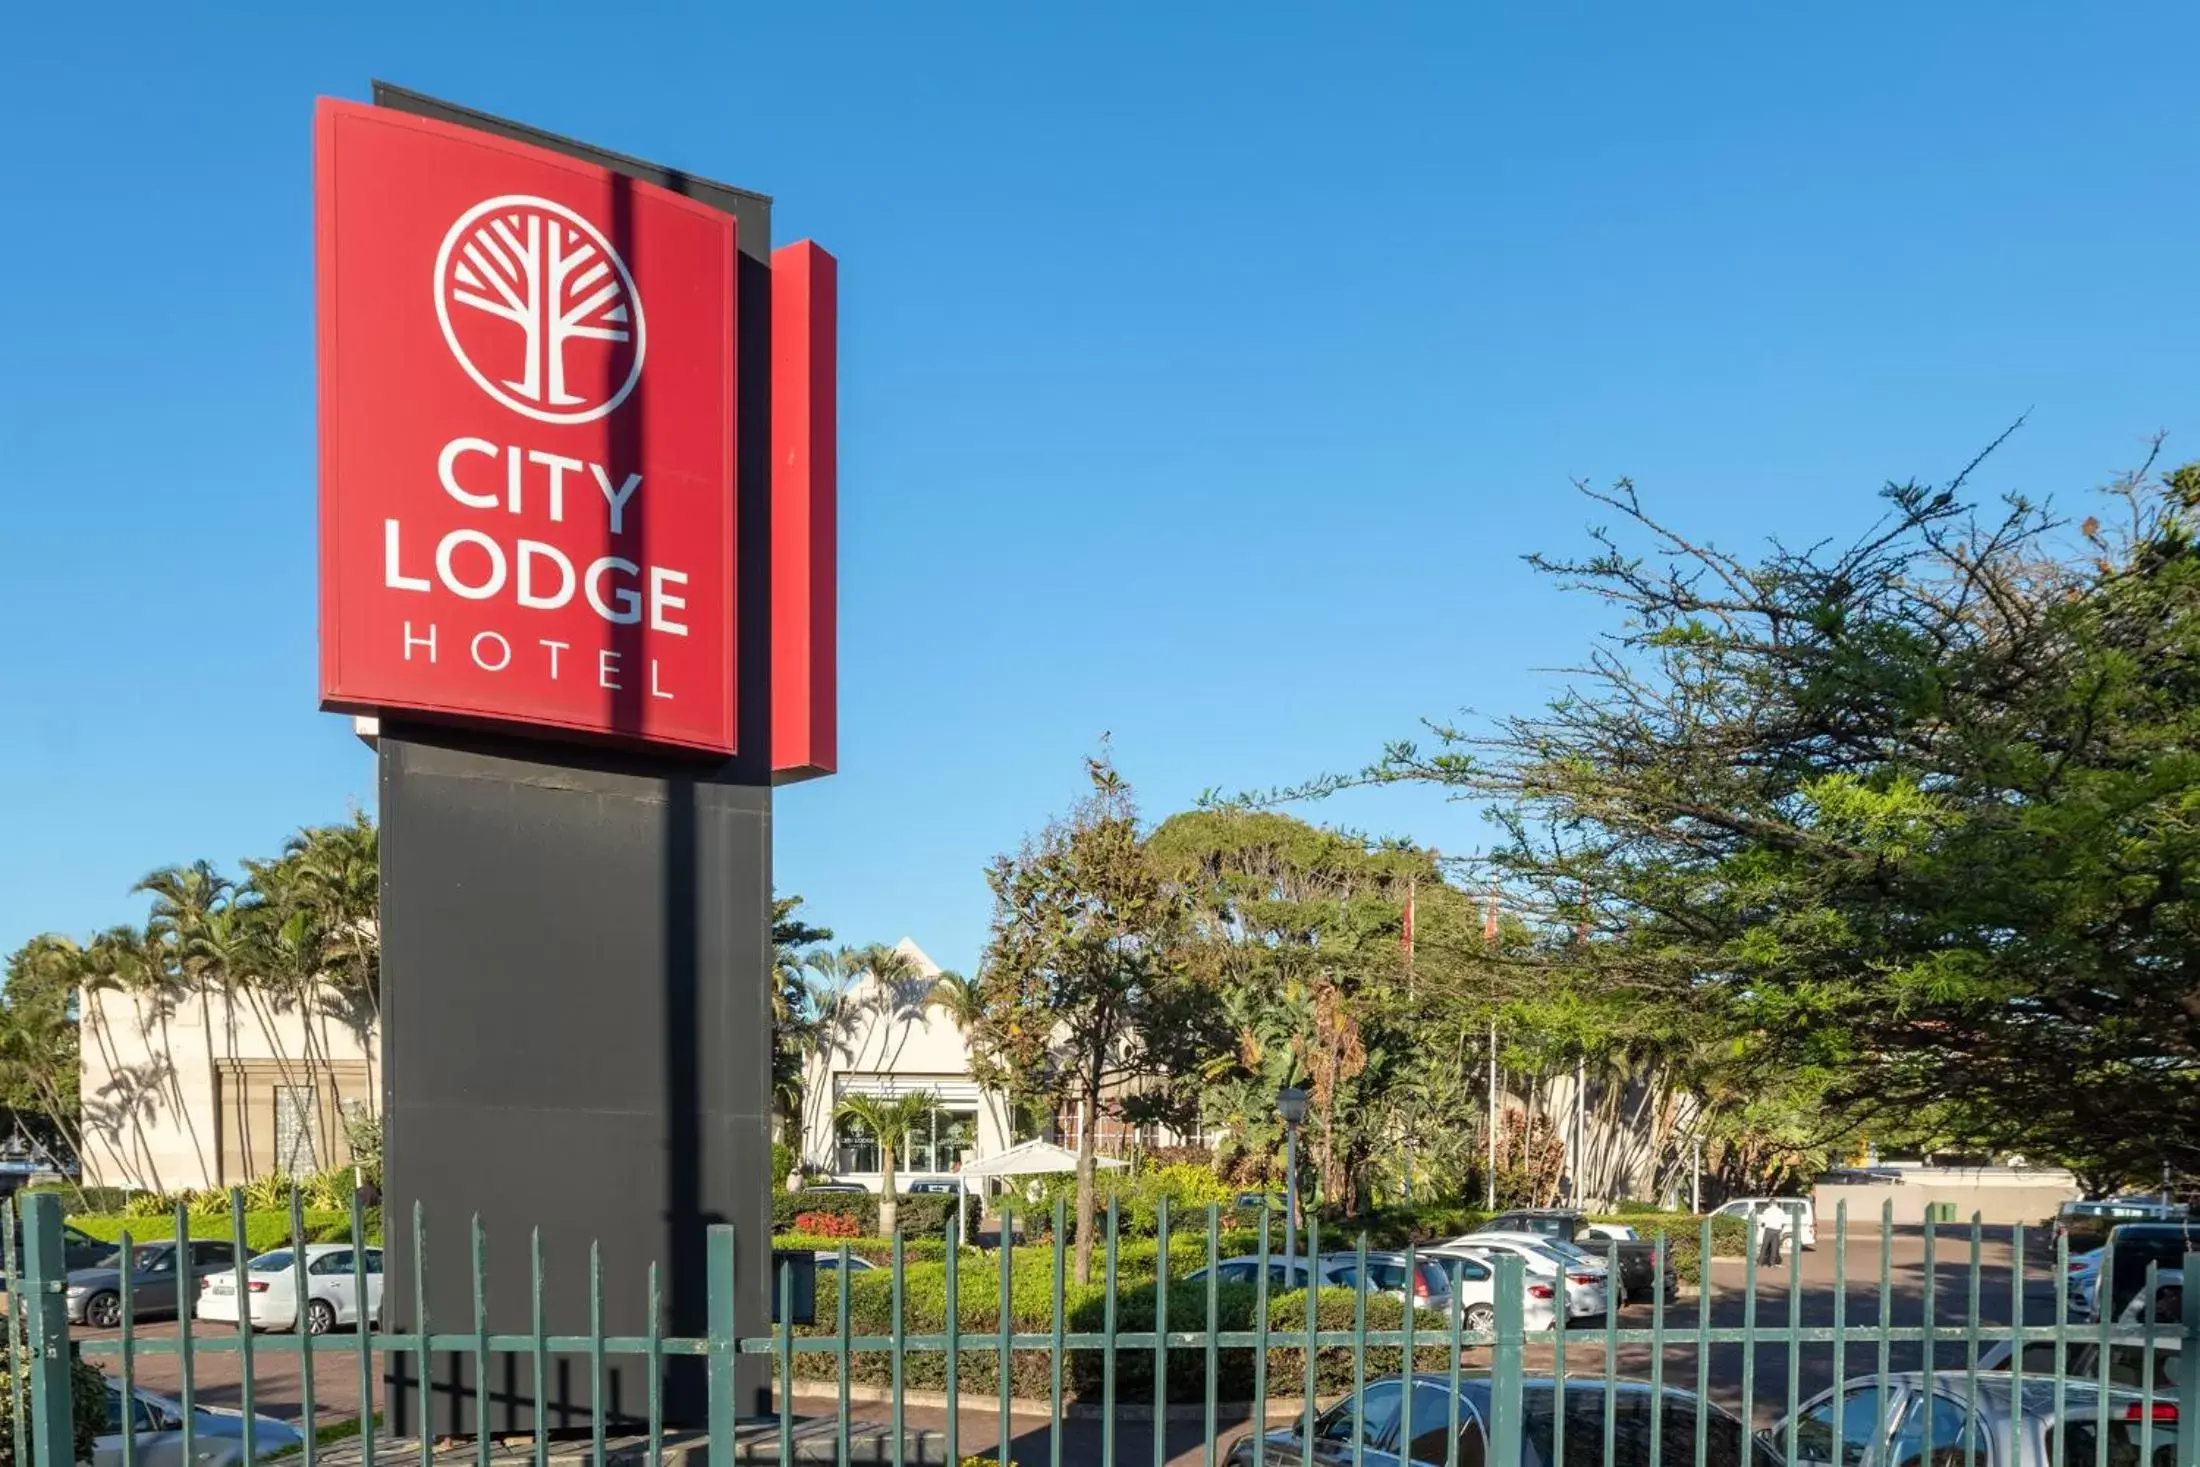 Property logo or sign, Property Building in City Lodge Hotel Durban